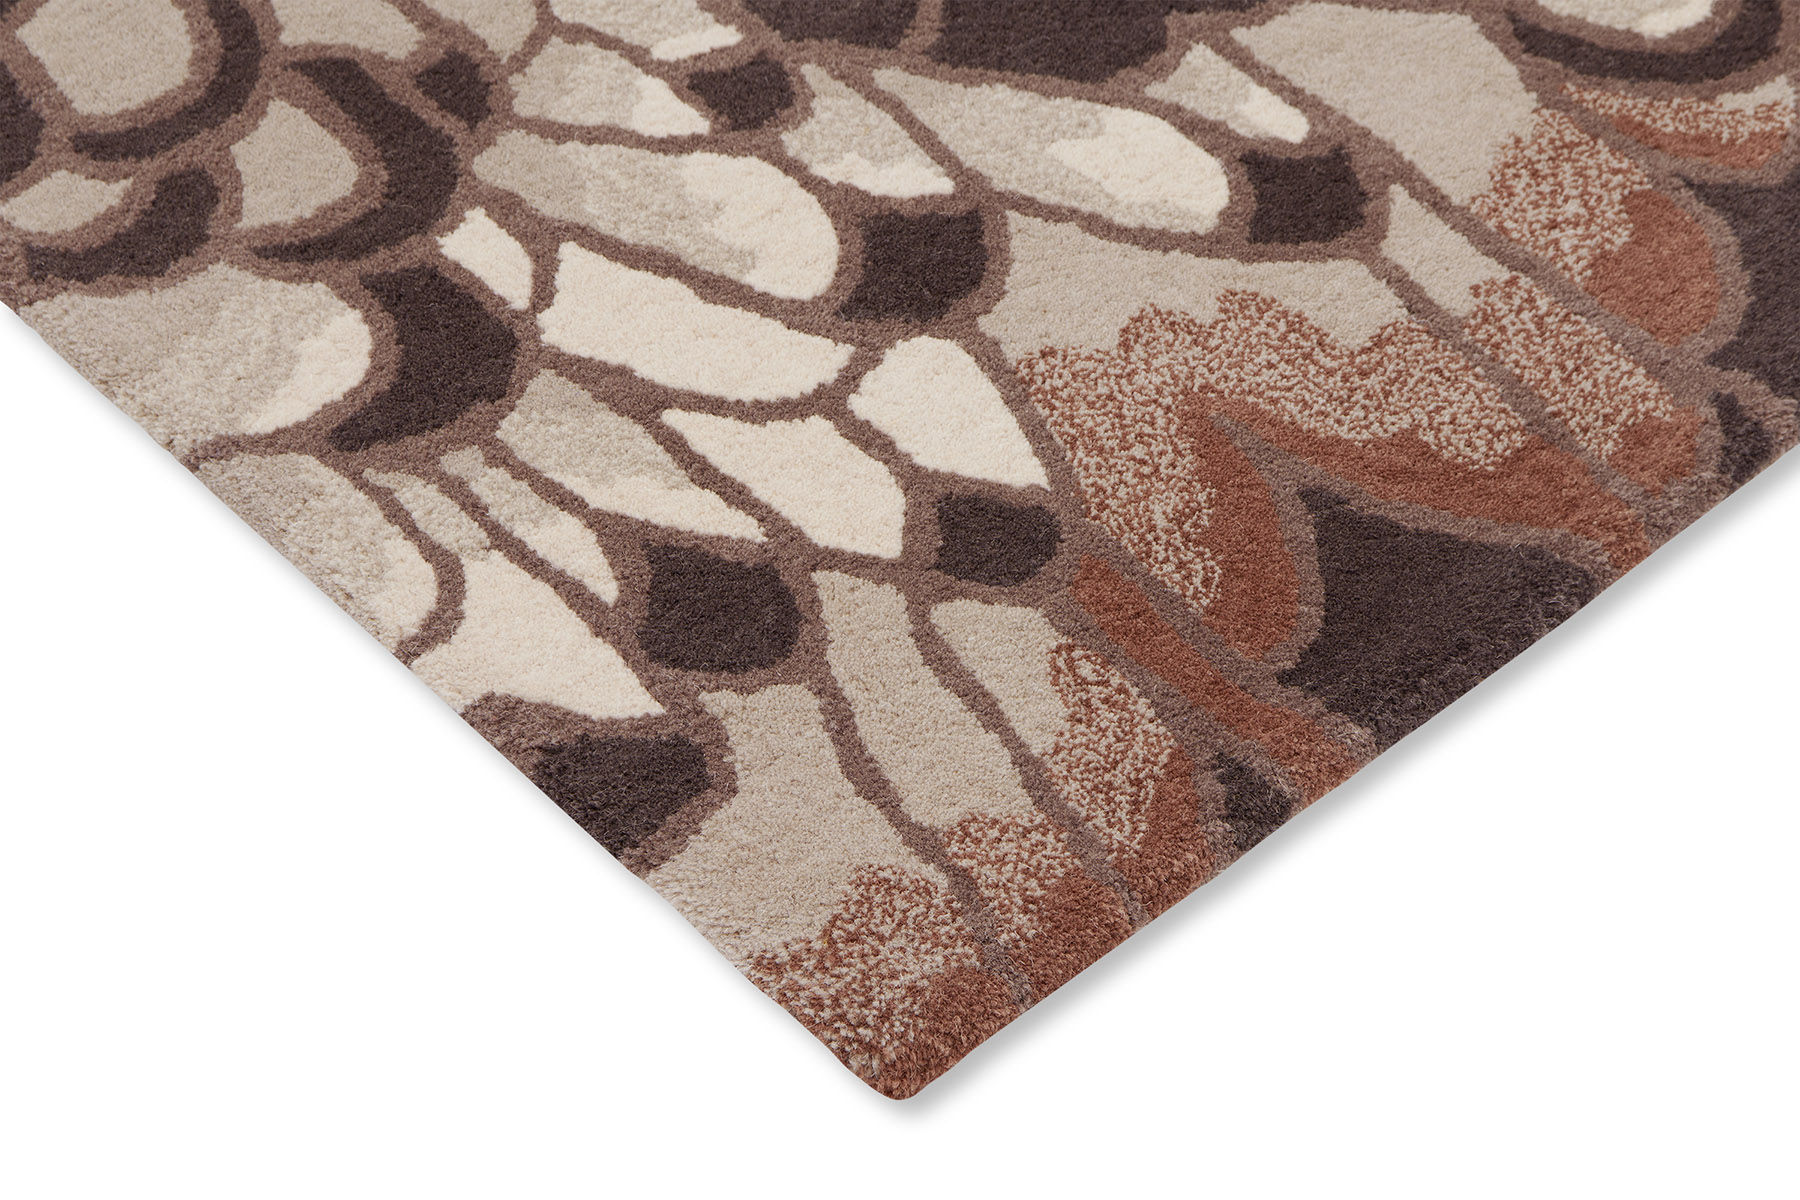 Feathers Natural Designer Rug ☞ Size: 5' 7" x 8' (170 x 240 cm)